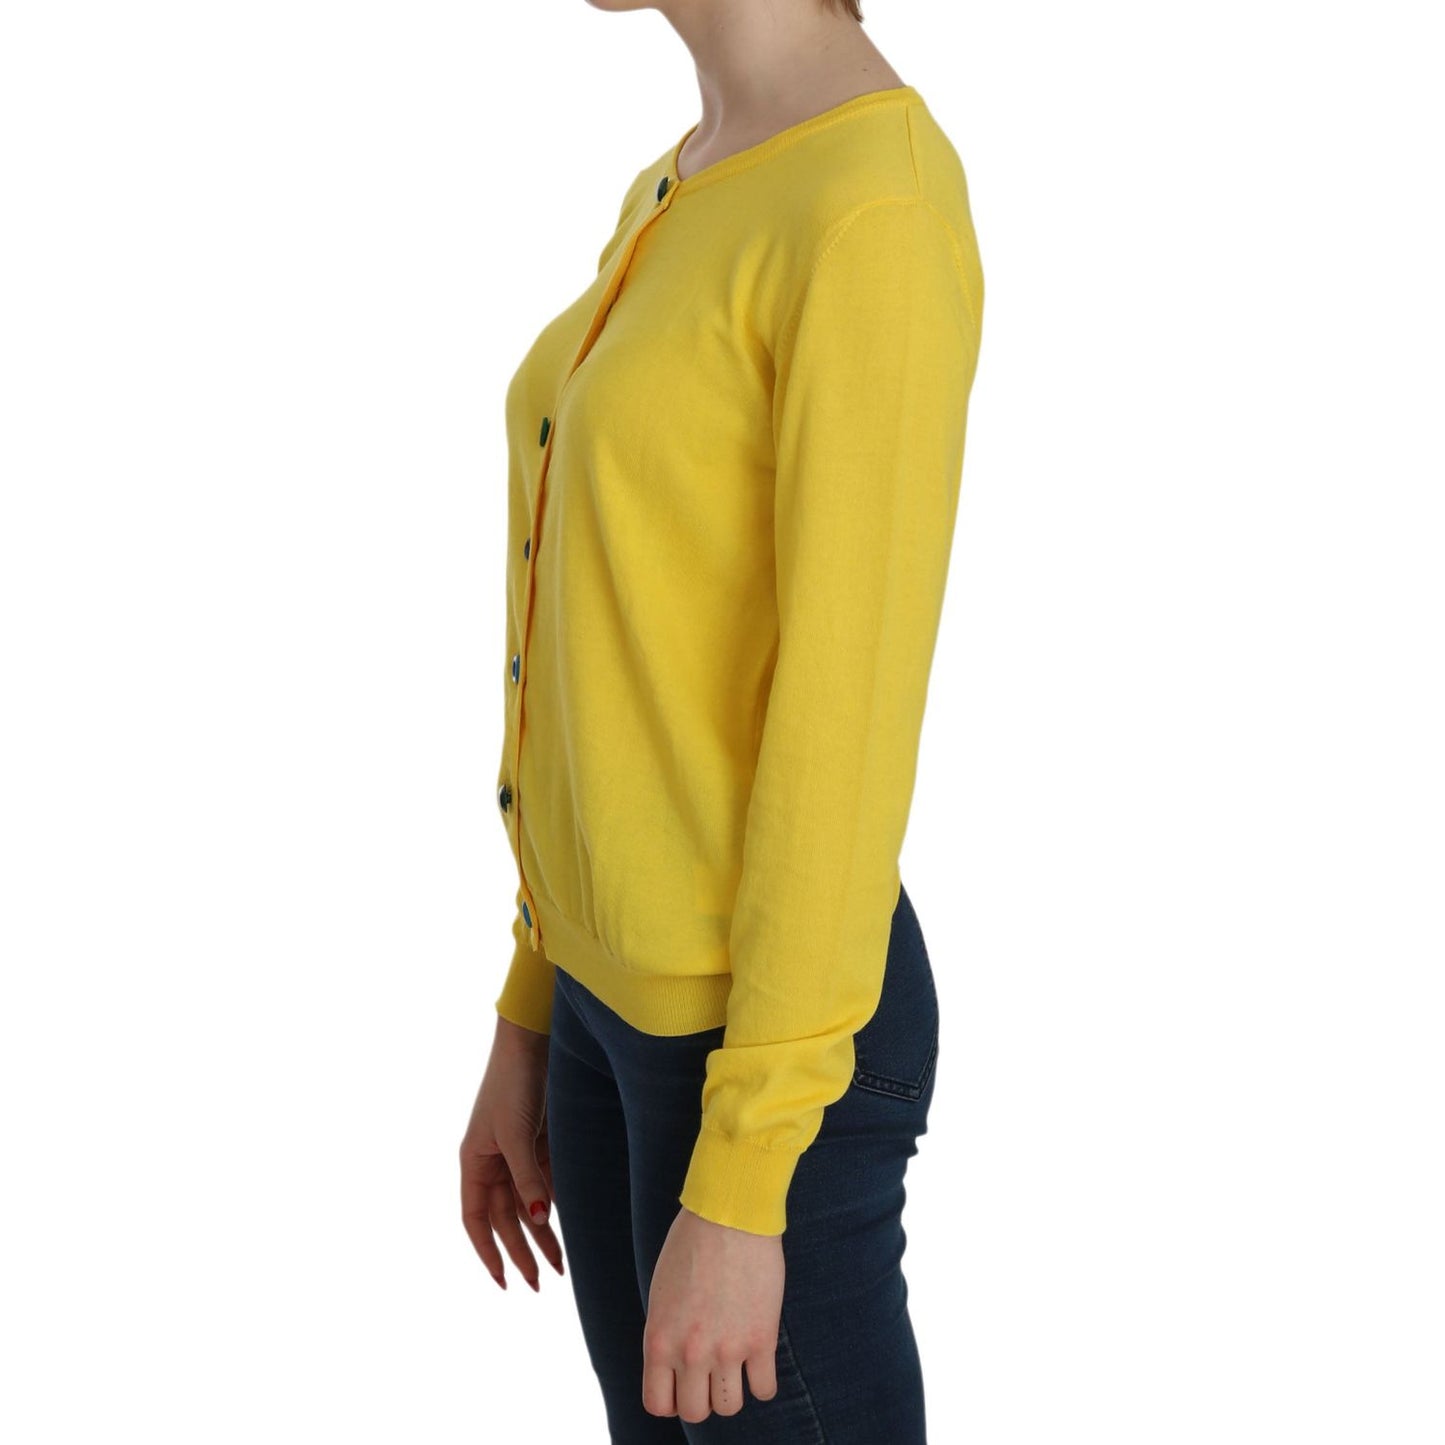 Jucca Radiant Yellow Cotton Sweater yellow-cotton-buttonfront-long-sleeve-sweater IMG_0019-48d454c5-c83.jpg